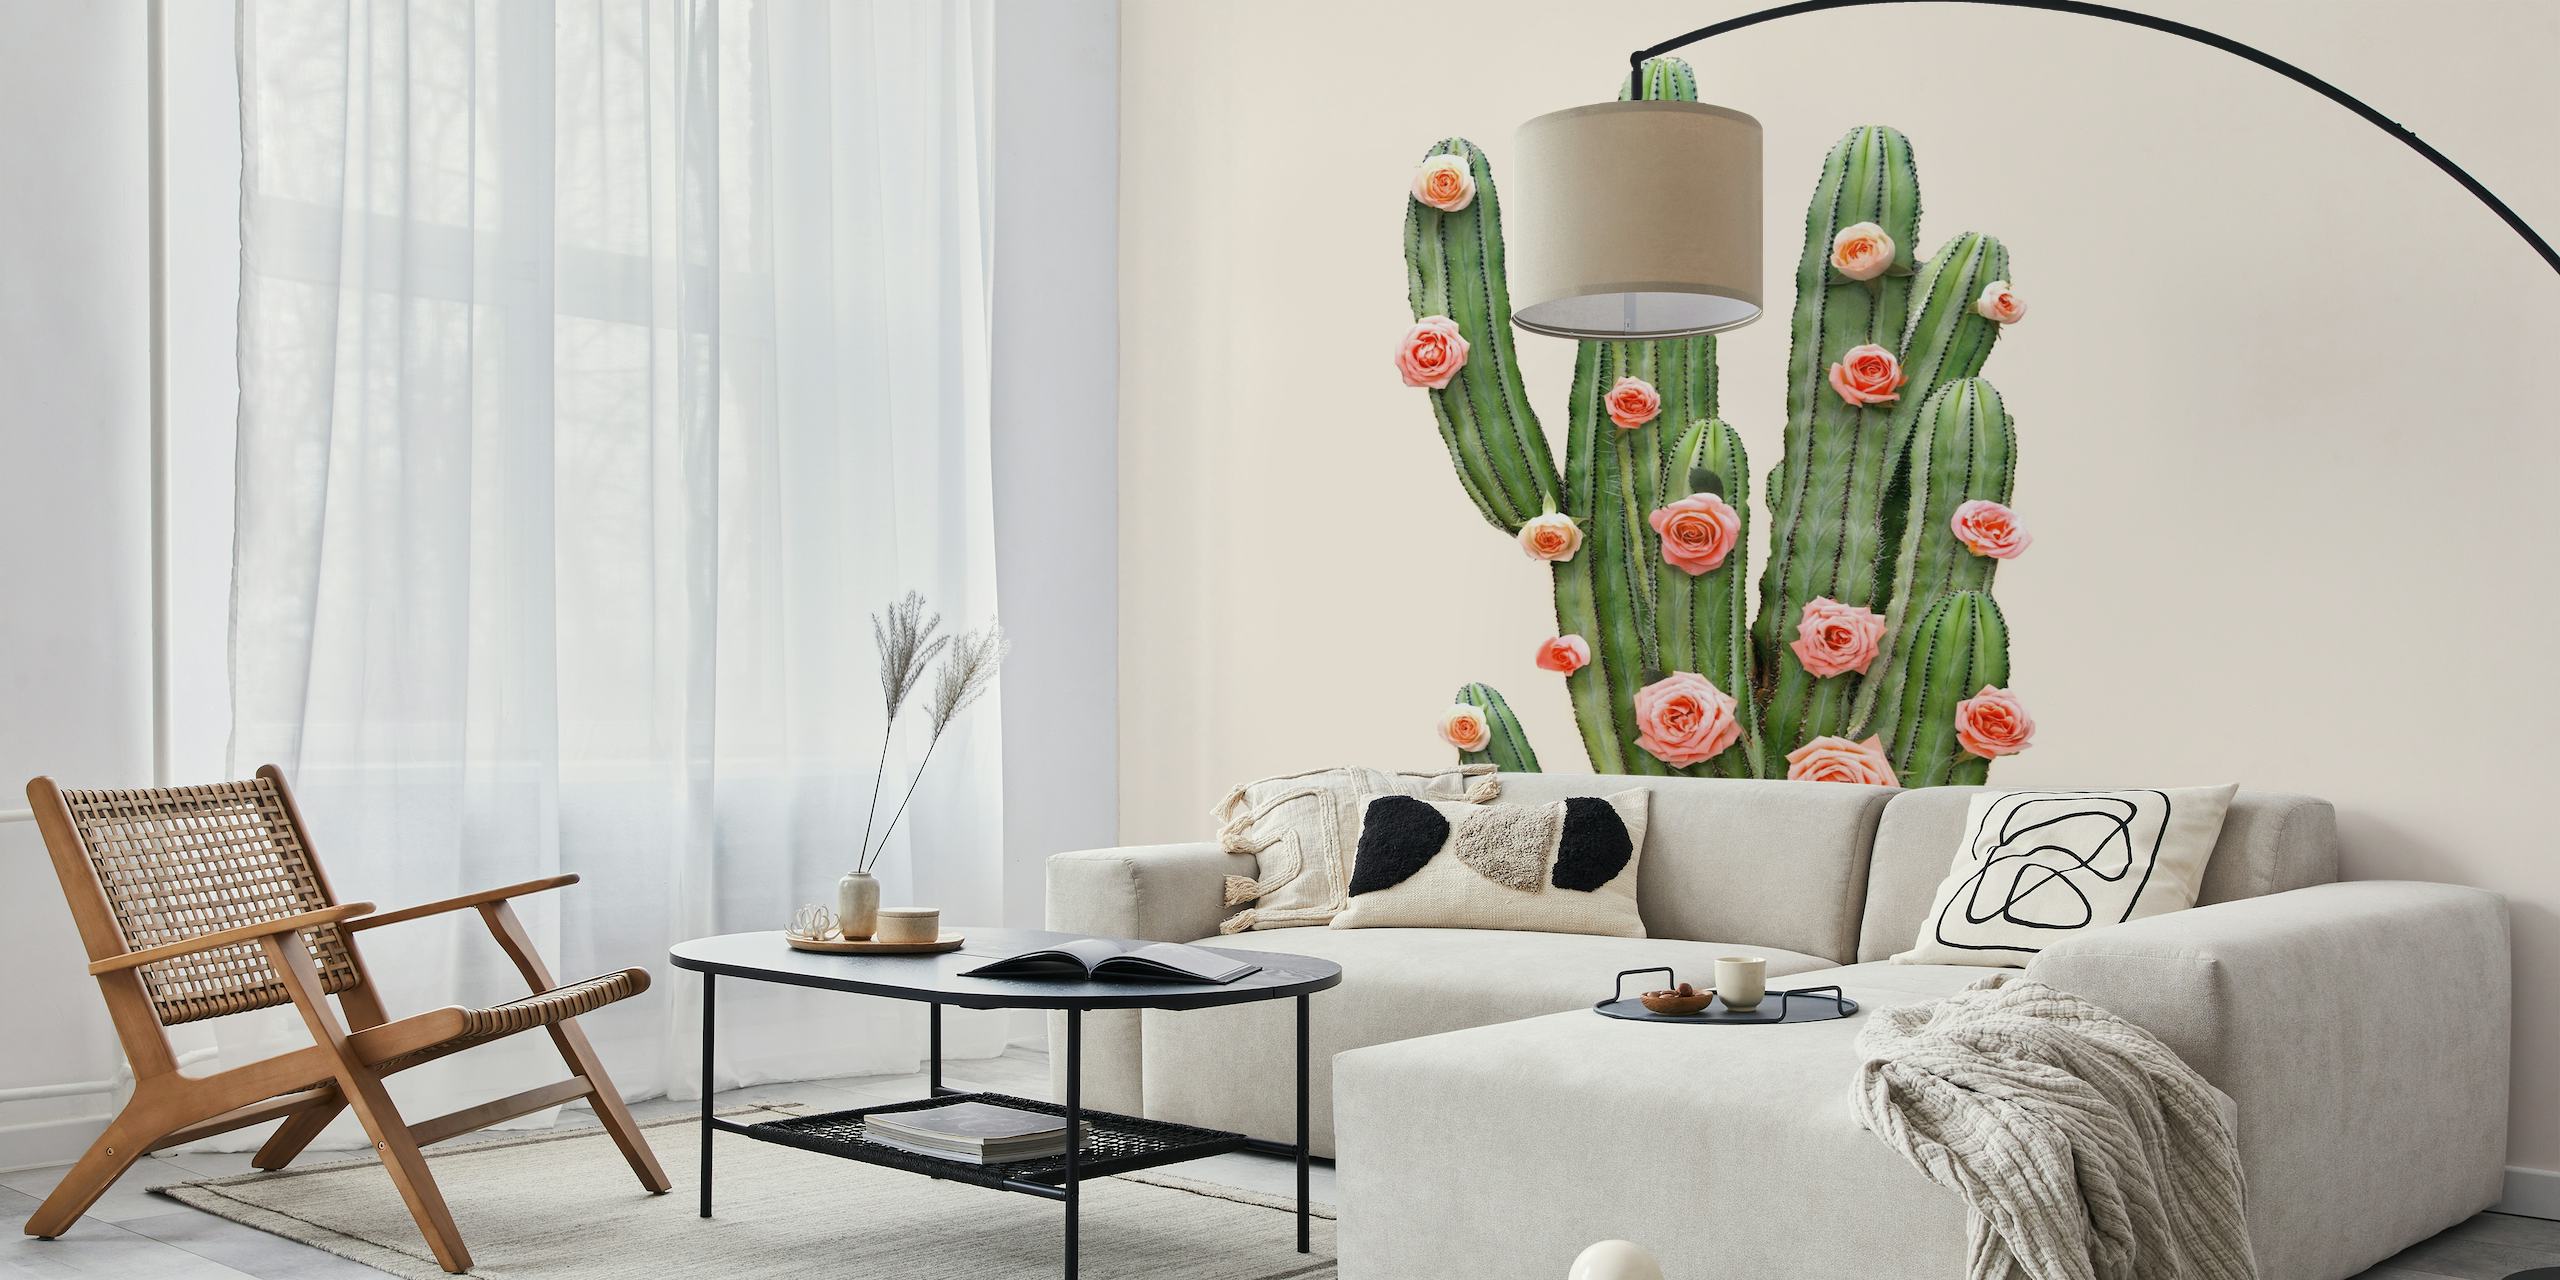 CACTUS AND ROSES wall mural with a cactus adorned with pink roses on a pastel background